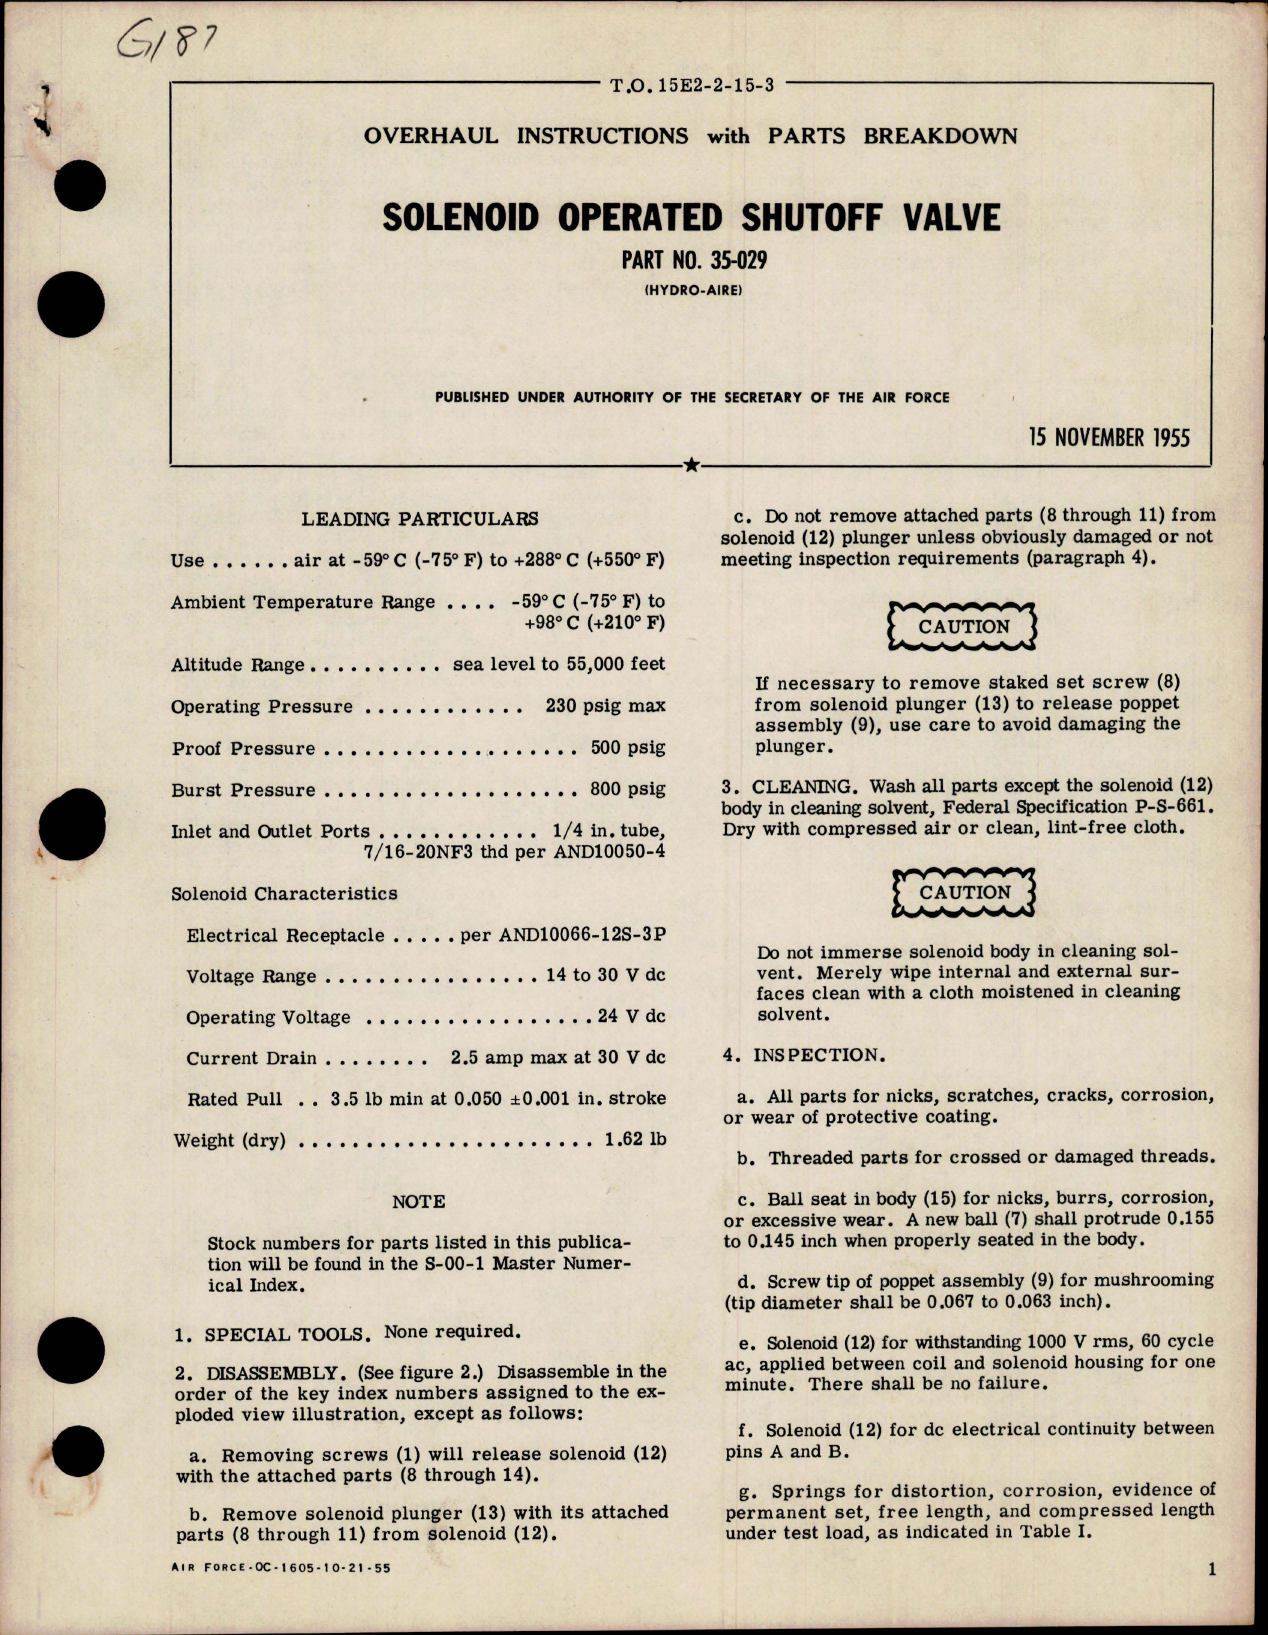 Sample page 1 from AirCorps Library document: Overhaul Instructions w Parts for Solenoid Operated Shutoff Valve - Part 35-029 